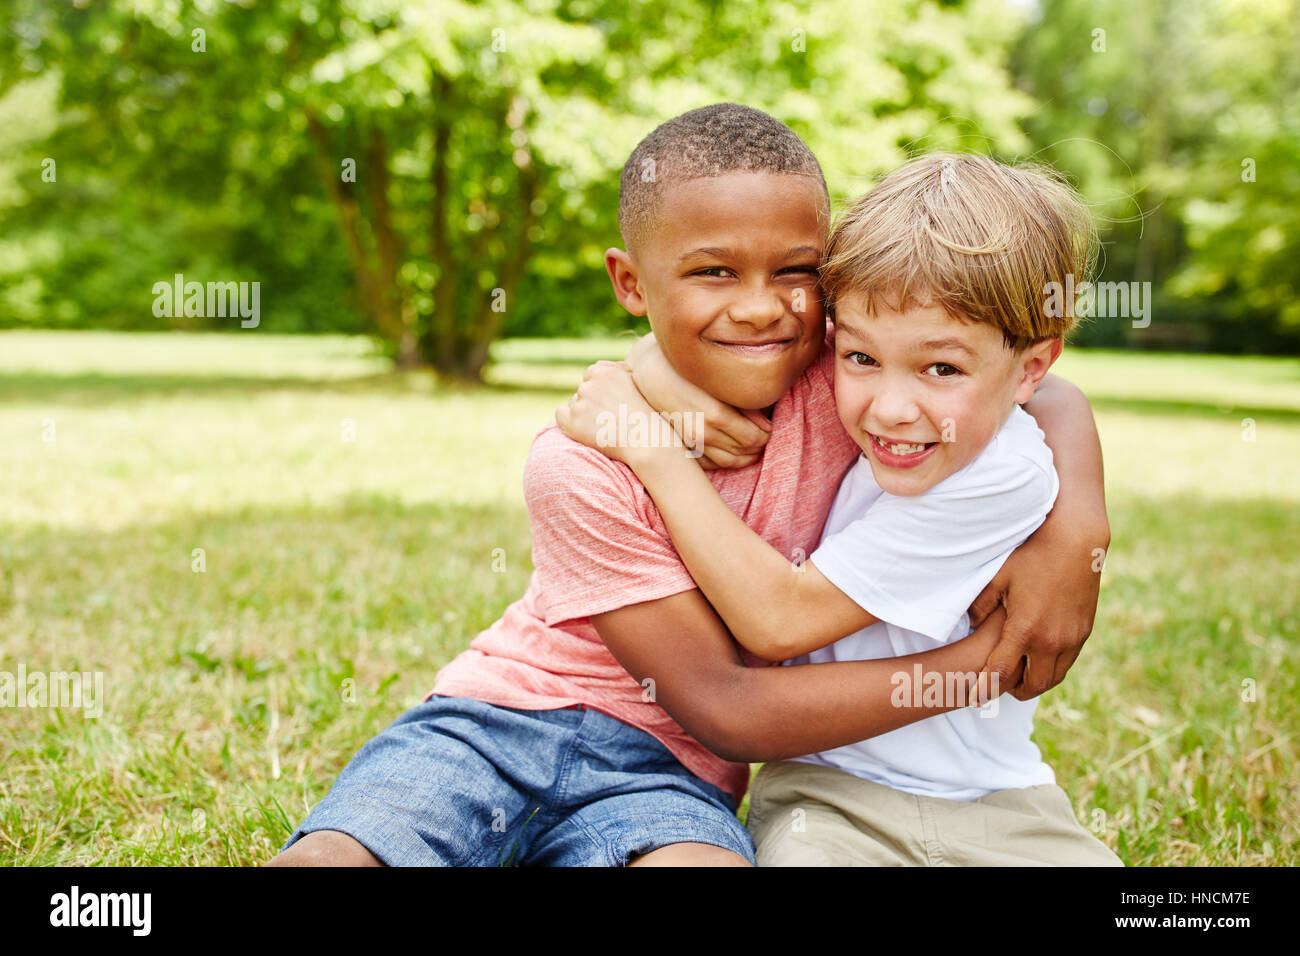 Two kids as friends fighting with each other for fun Stock Photo